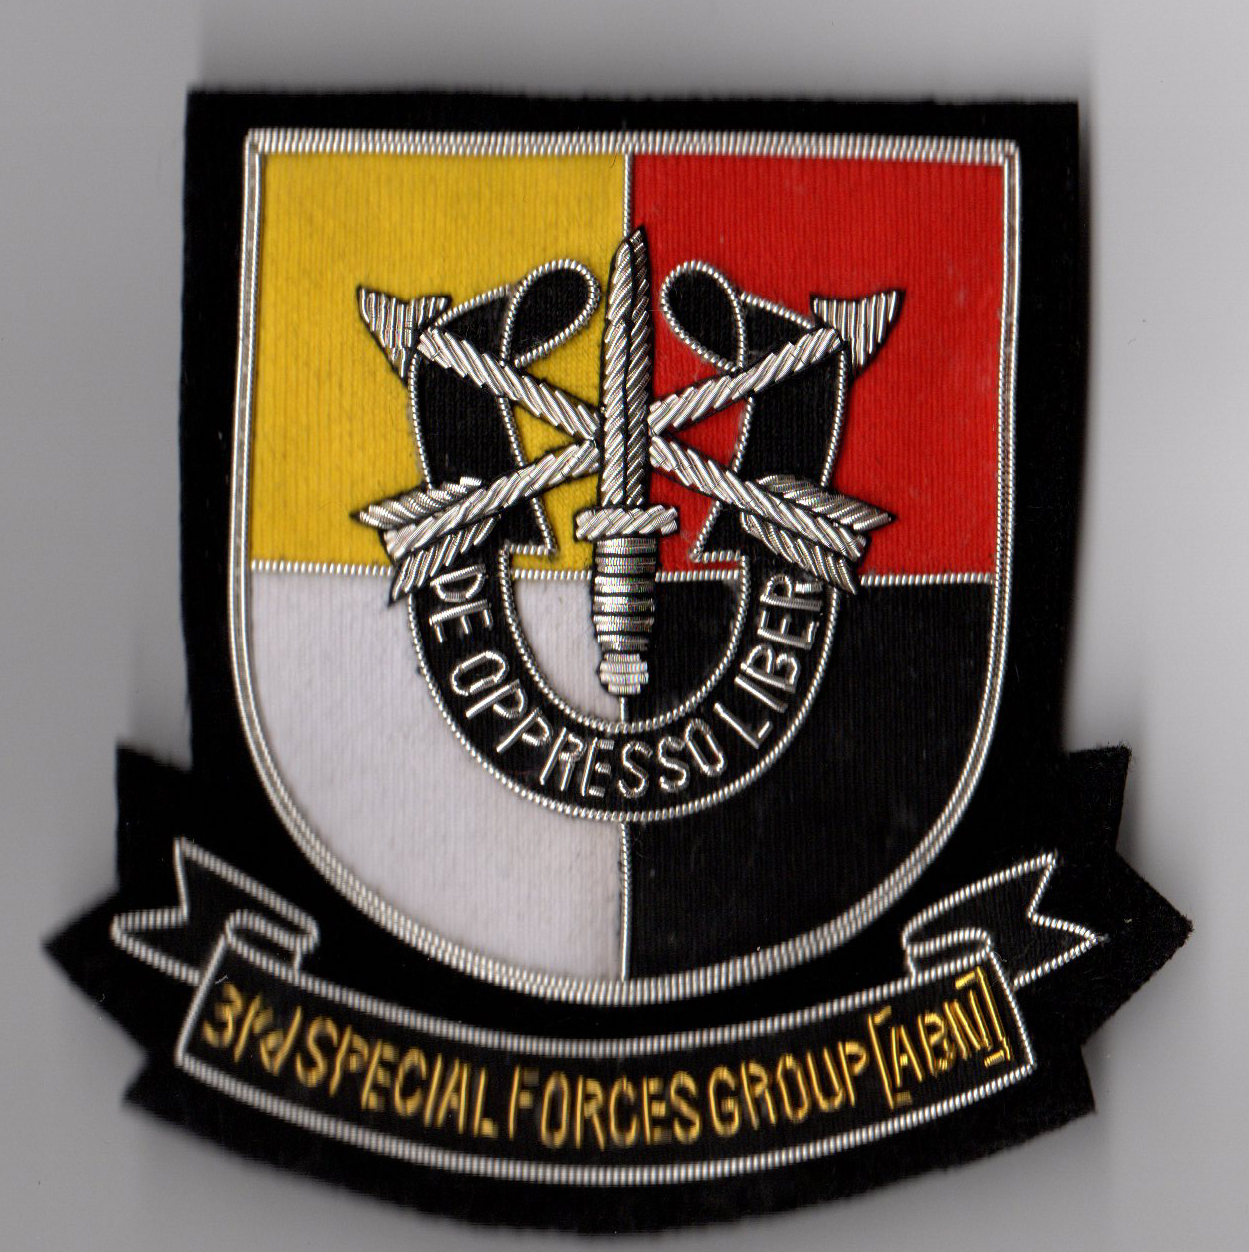 Special Forces Group Patch